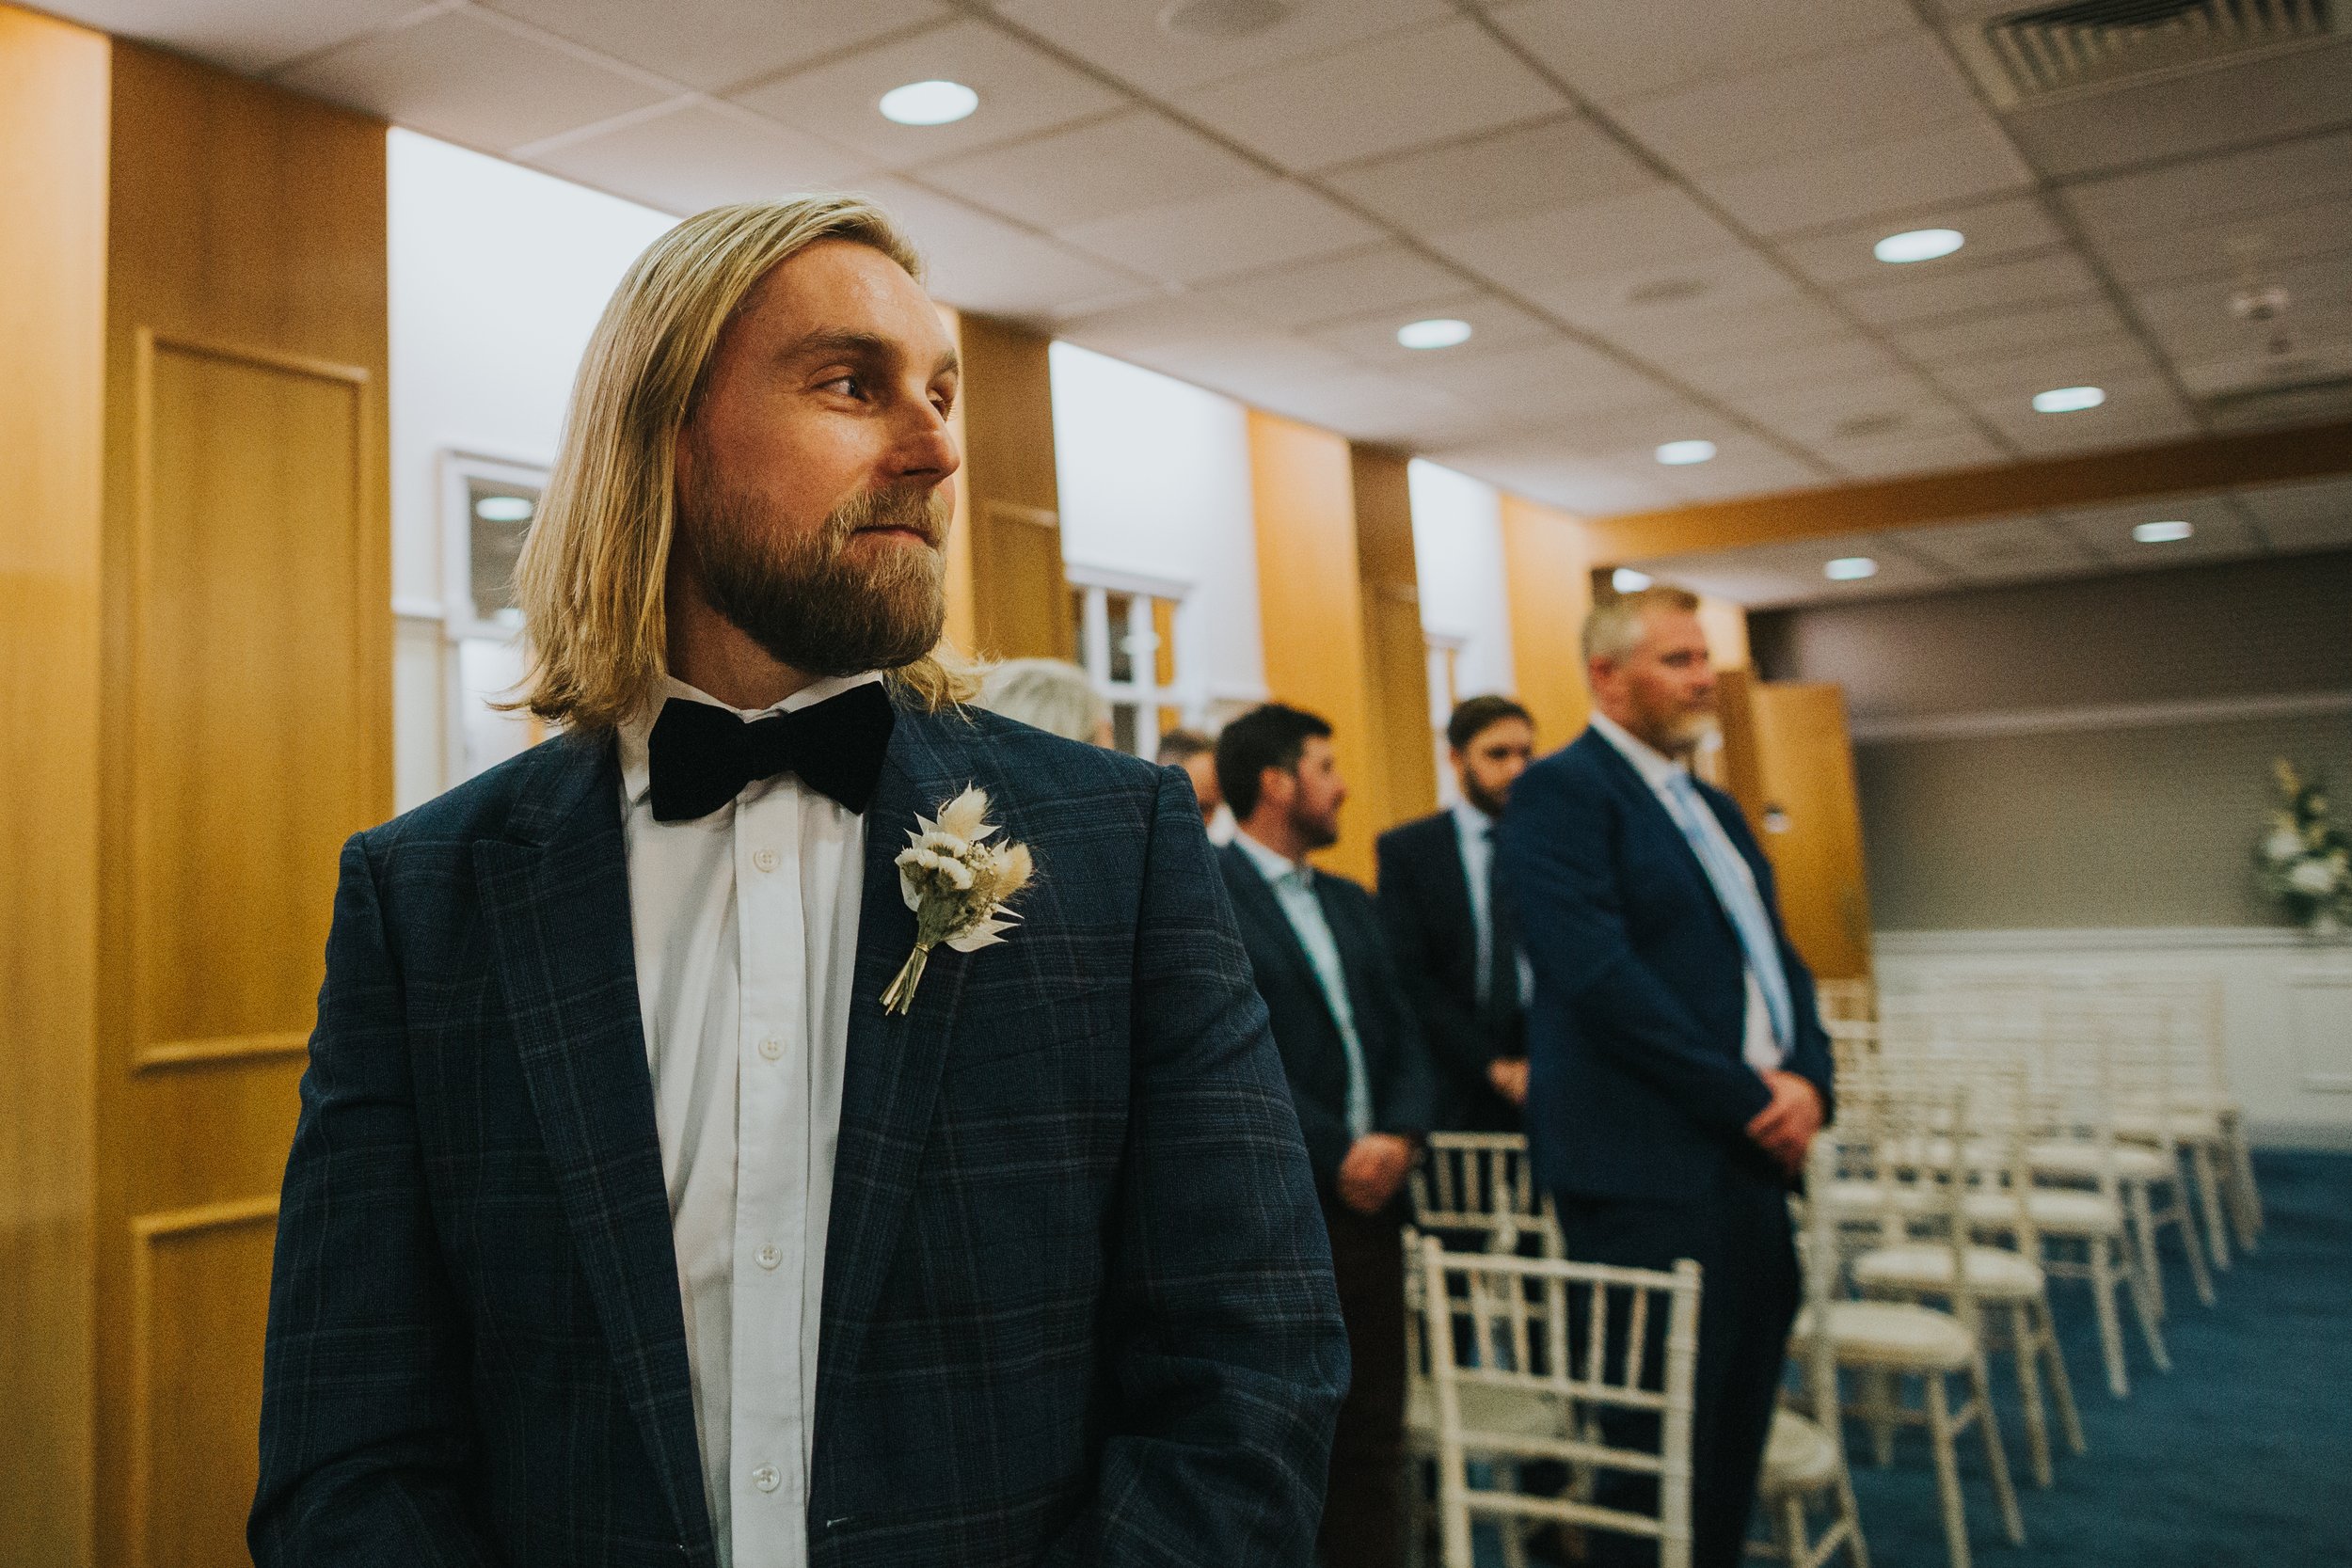 Groom stands as his bride enters the ceremony room.